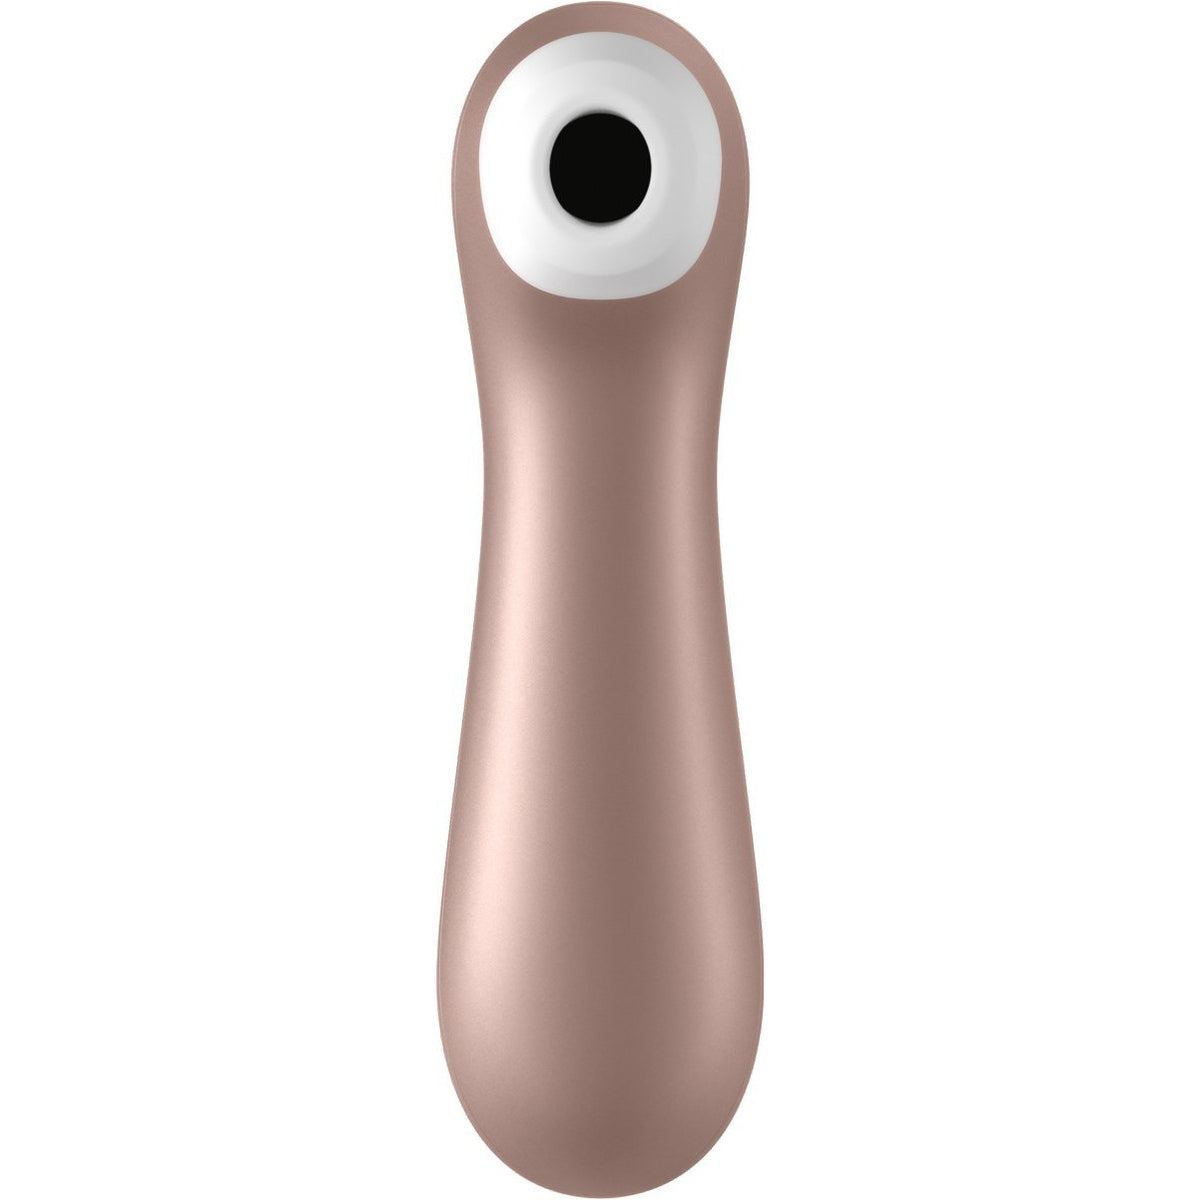 Satisfyer Pro 2+ – Clitoral Air Pulse Vibrator – Brown